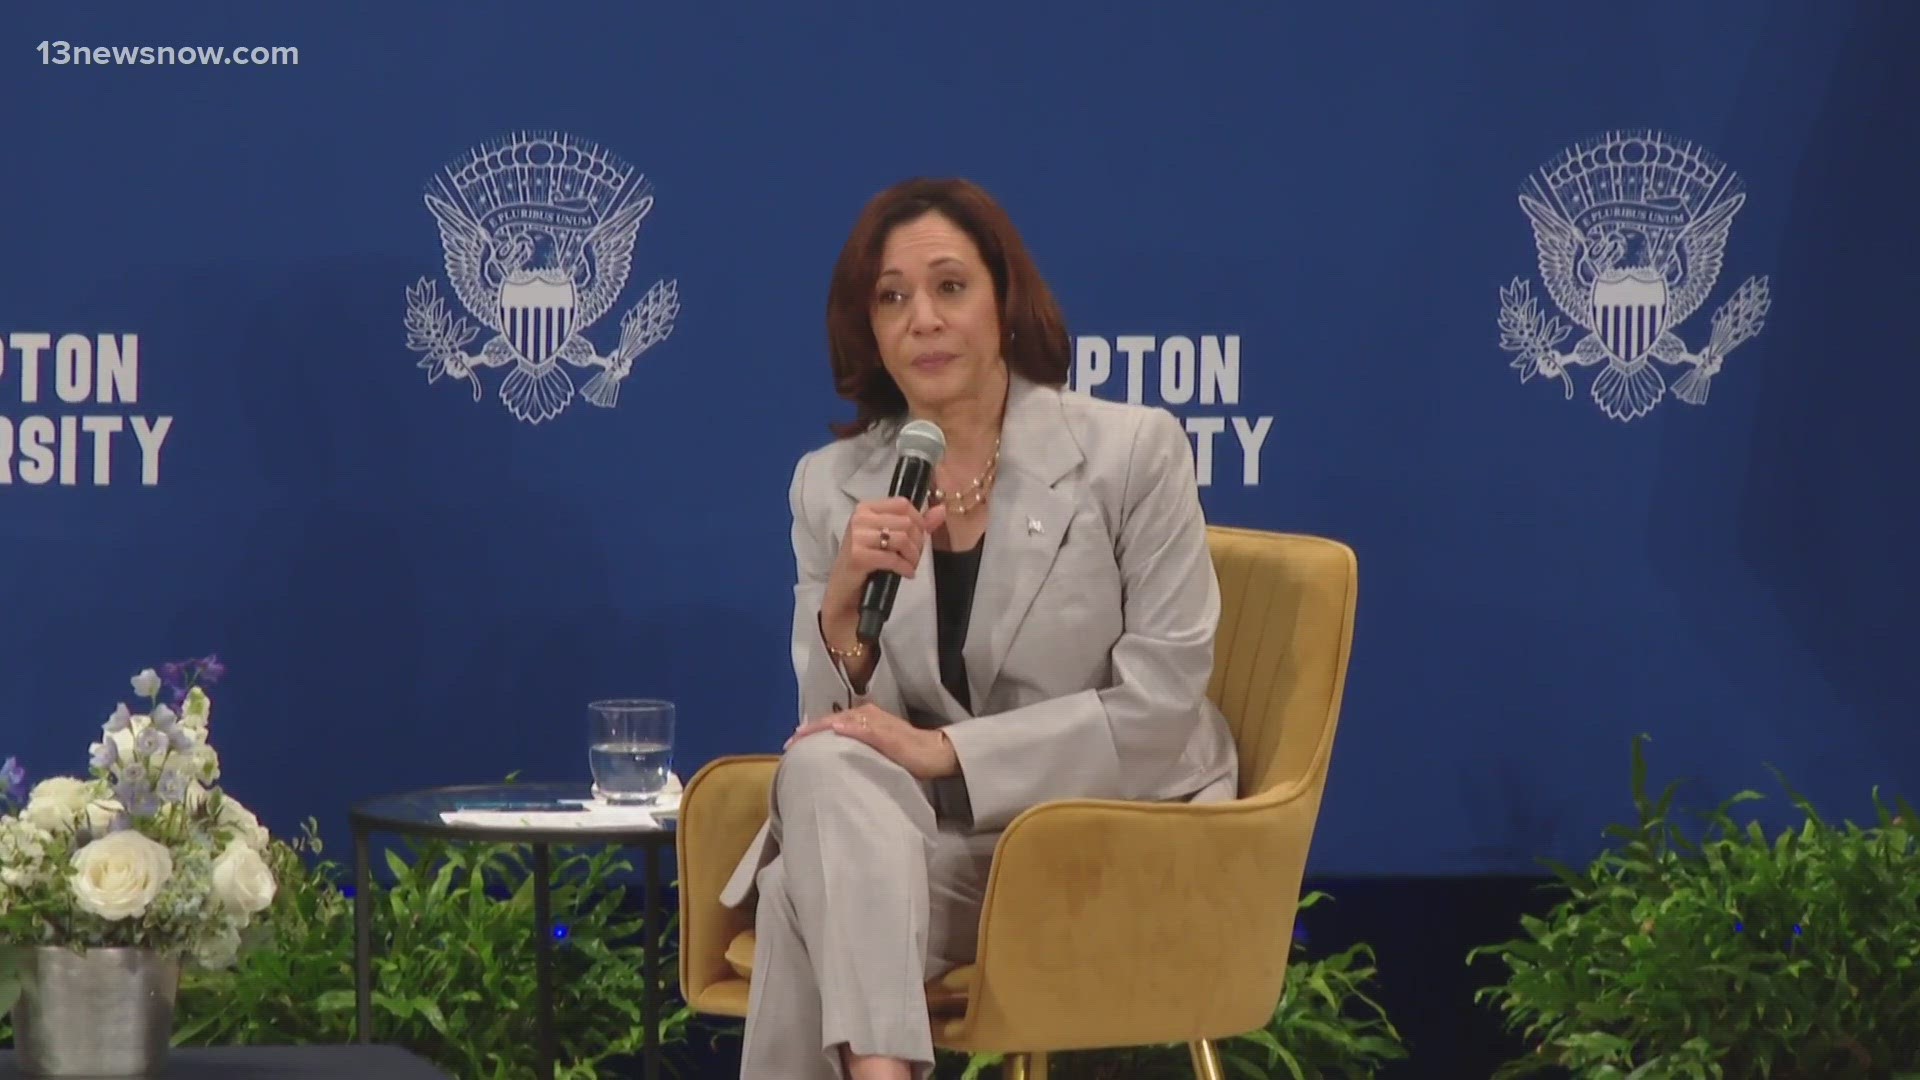 Vice President Kamala Harris chose the school for the first stop of her "Fight For Our Freedoms" tour.